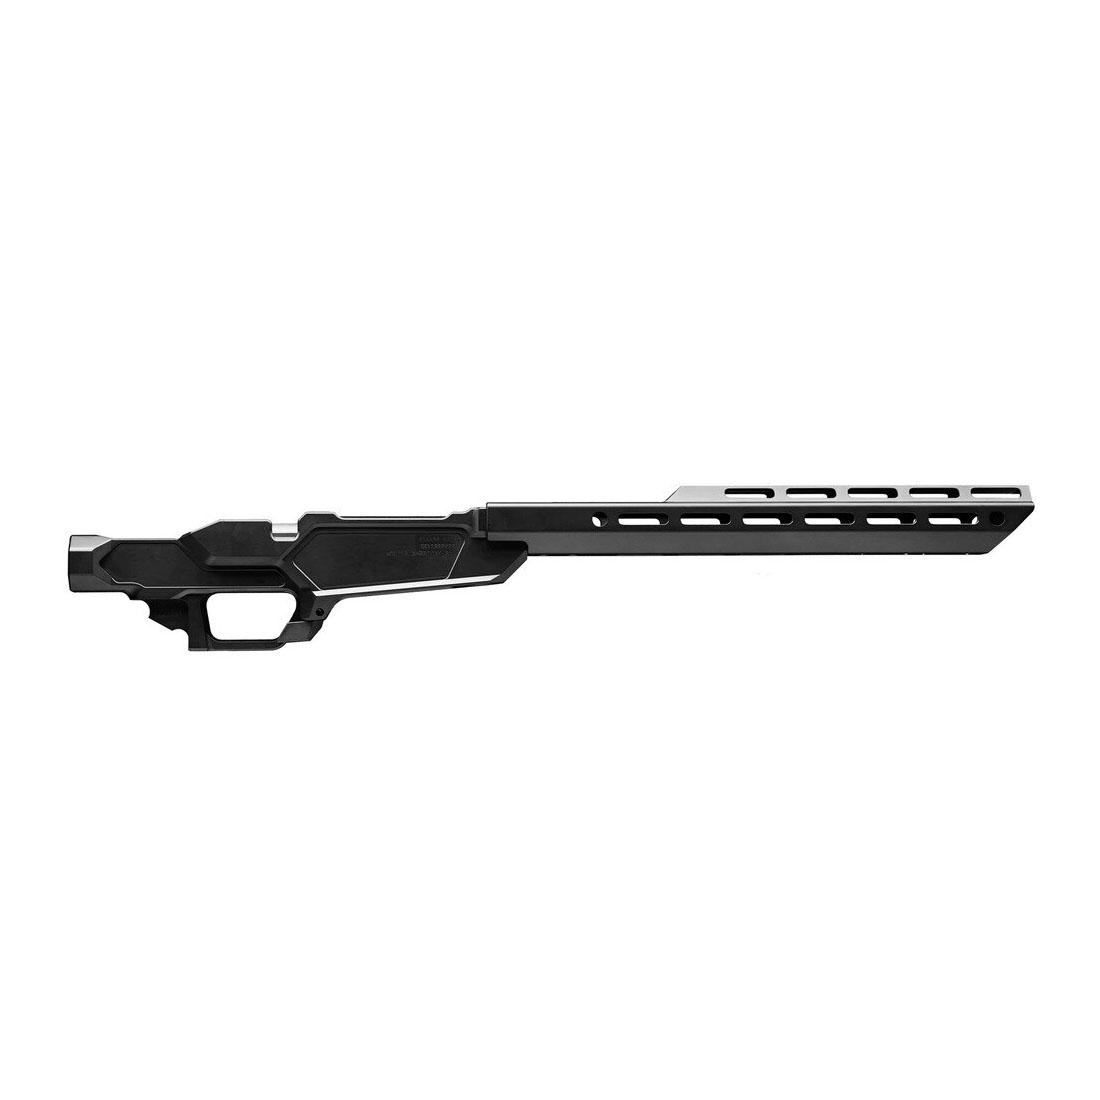 Will this fit the ruger American gen 2?